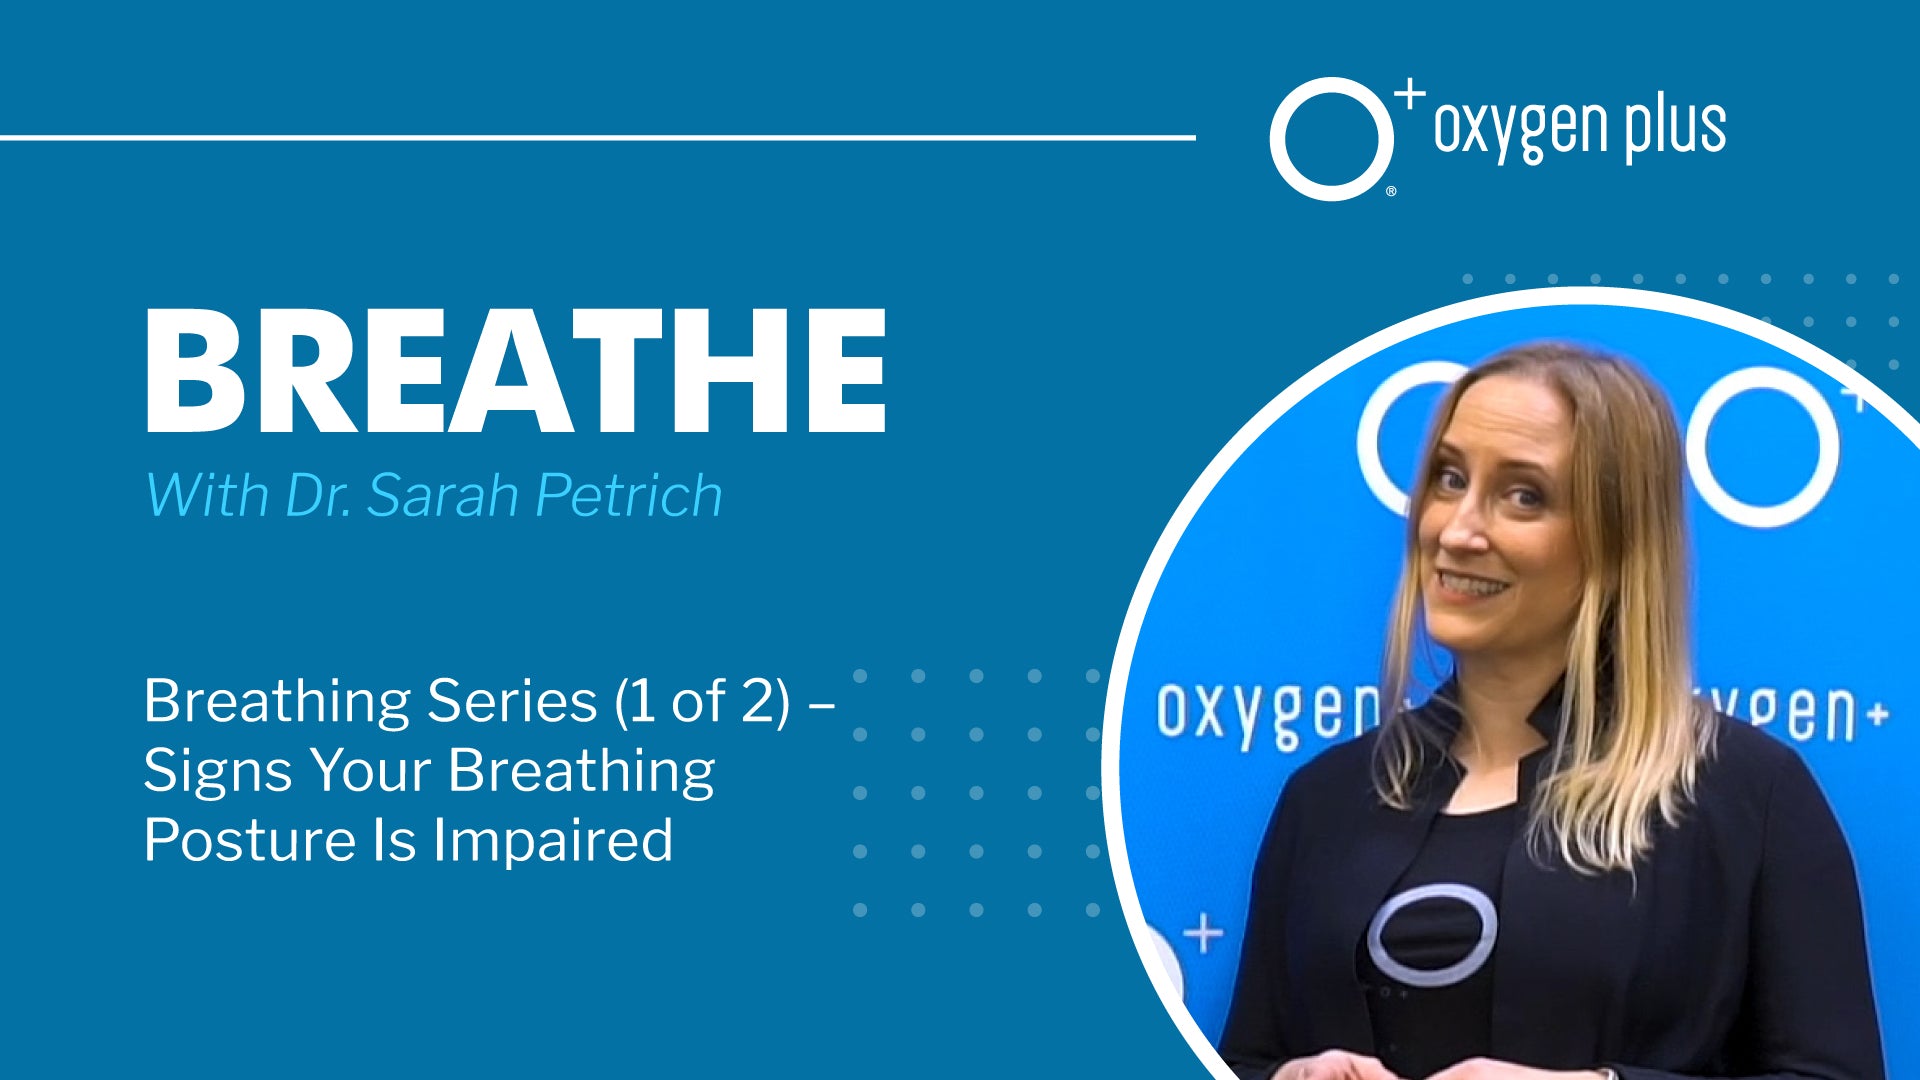 Breathing Series (1 of 2): “Visual Signs Your Breathing Posture Is Impaired" with Dr. Sarah Petrich